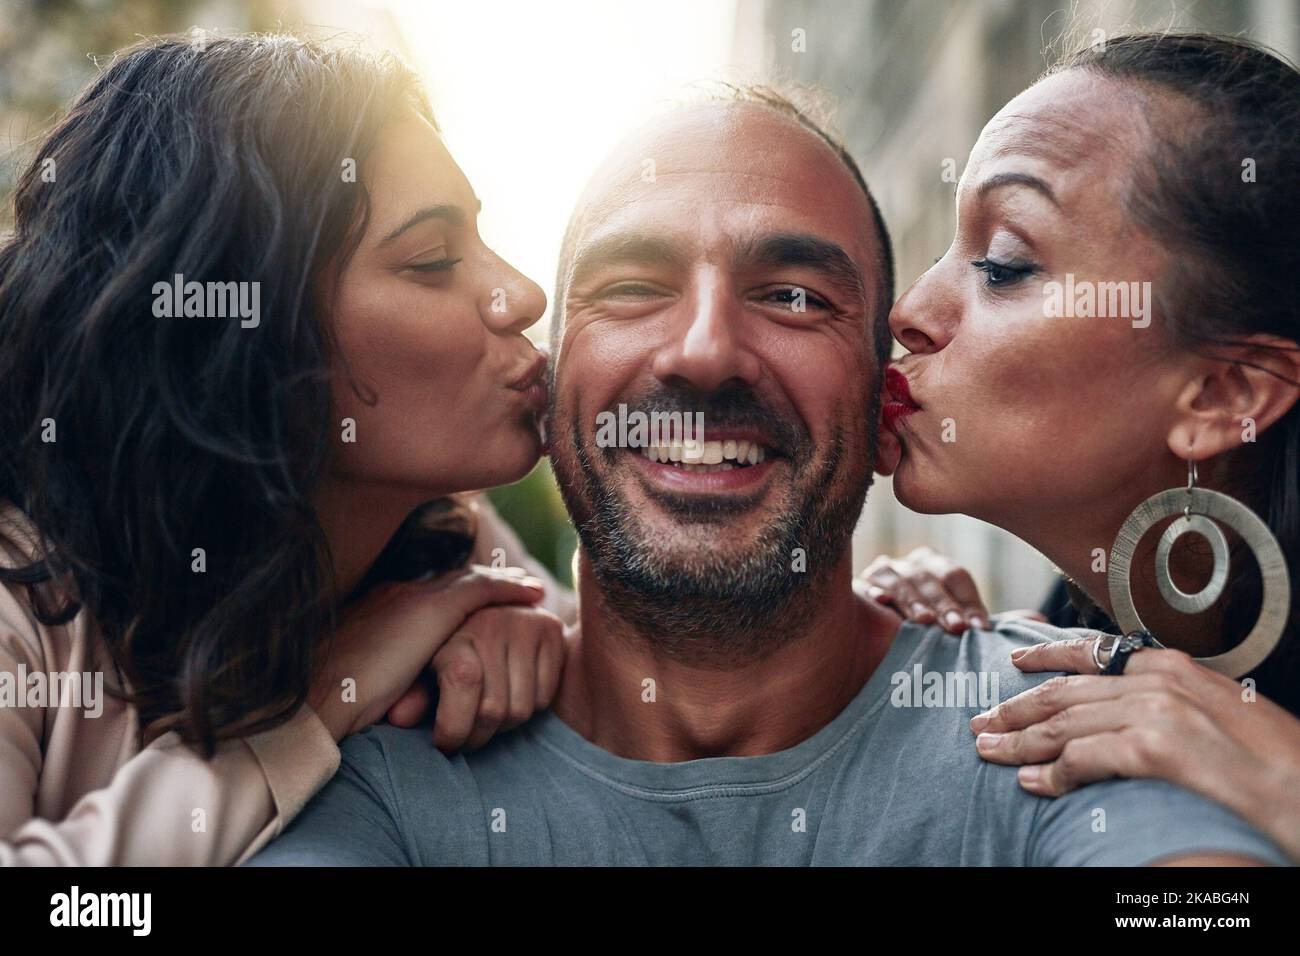 Kisses from my two favorite ladies. two women kissing their male friend on his cheeks. Stock Photo